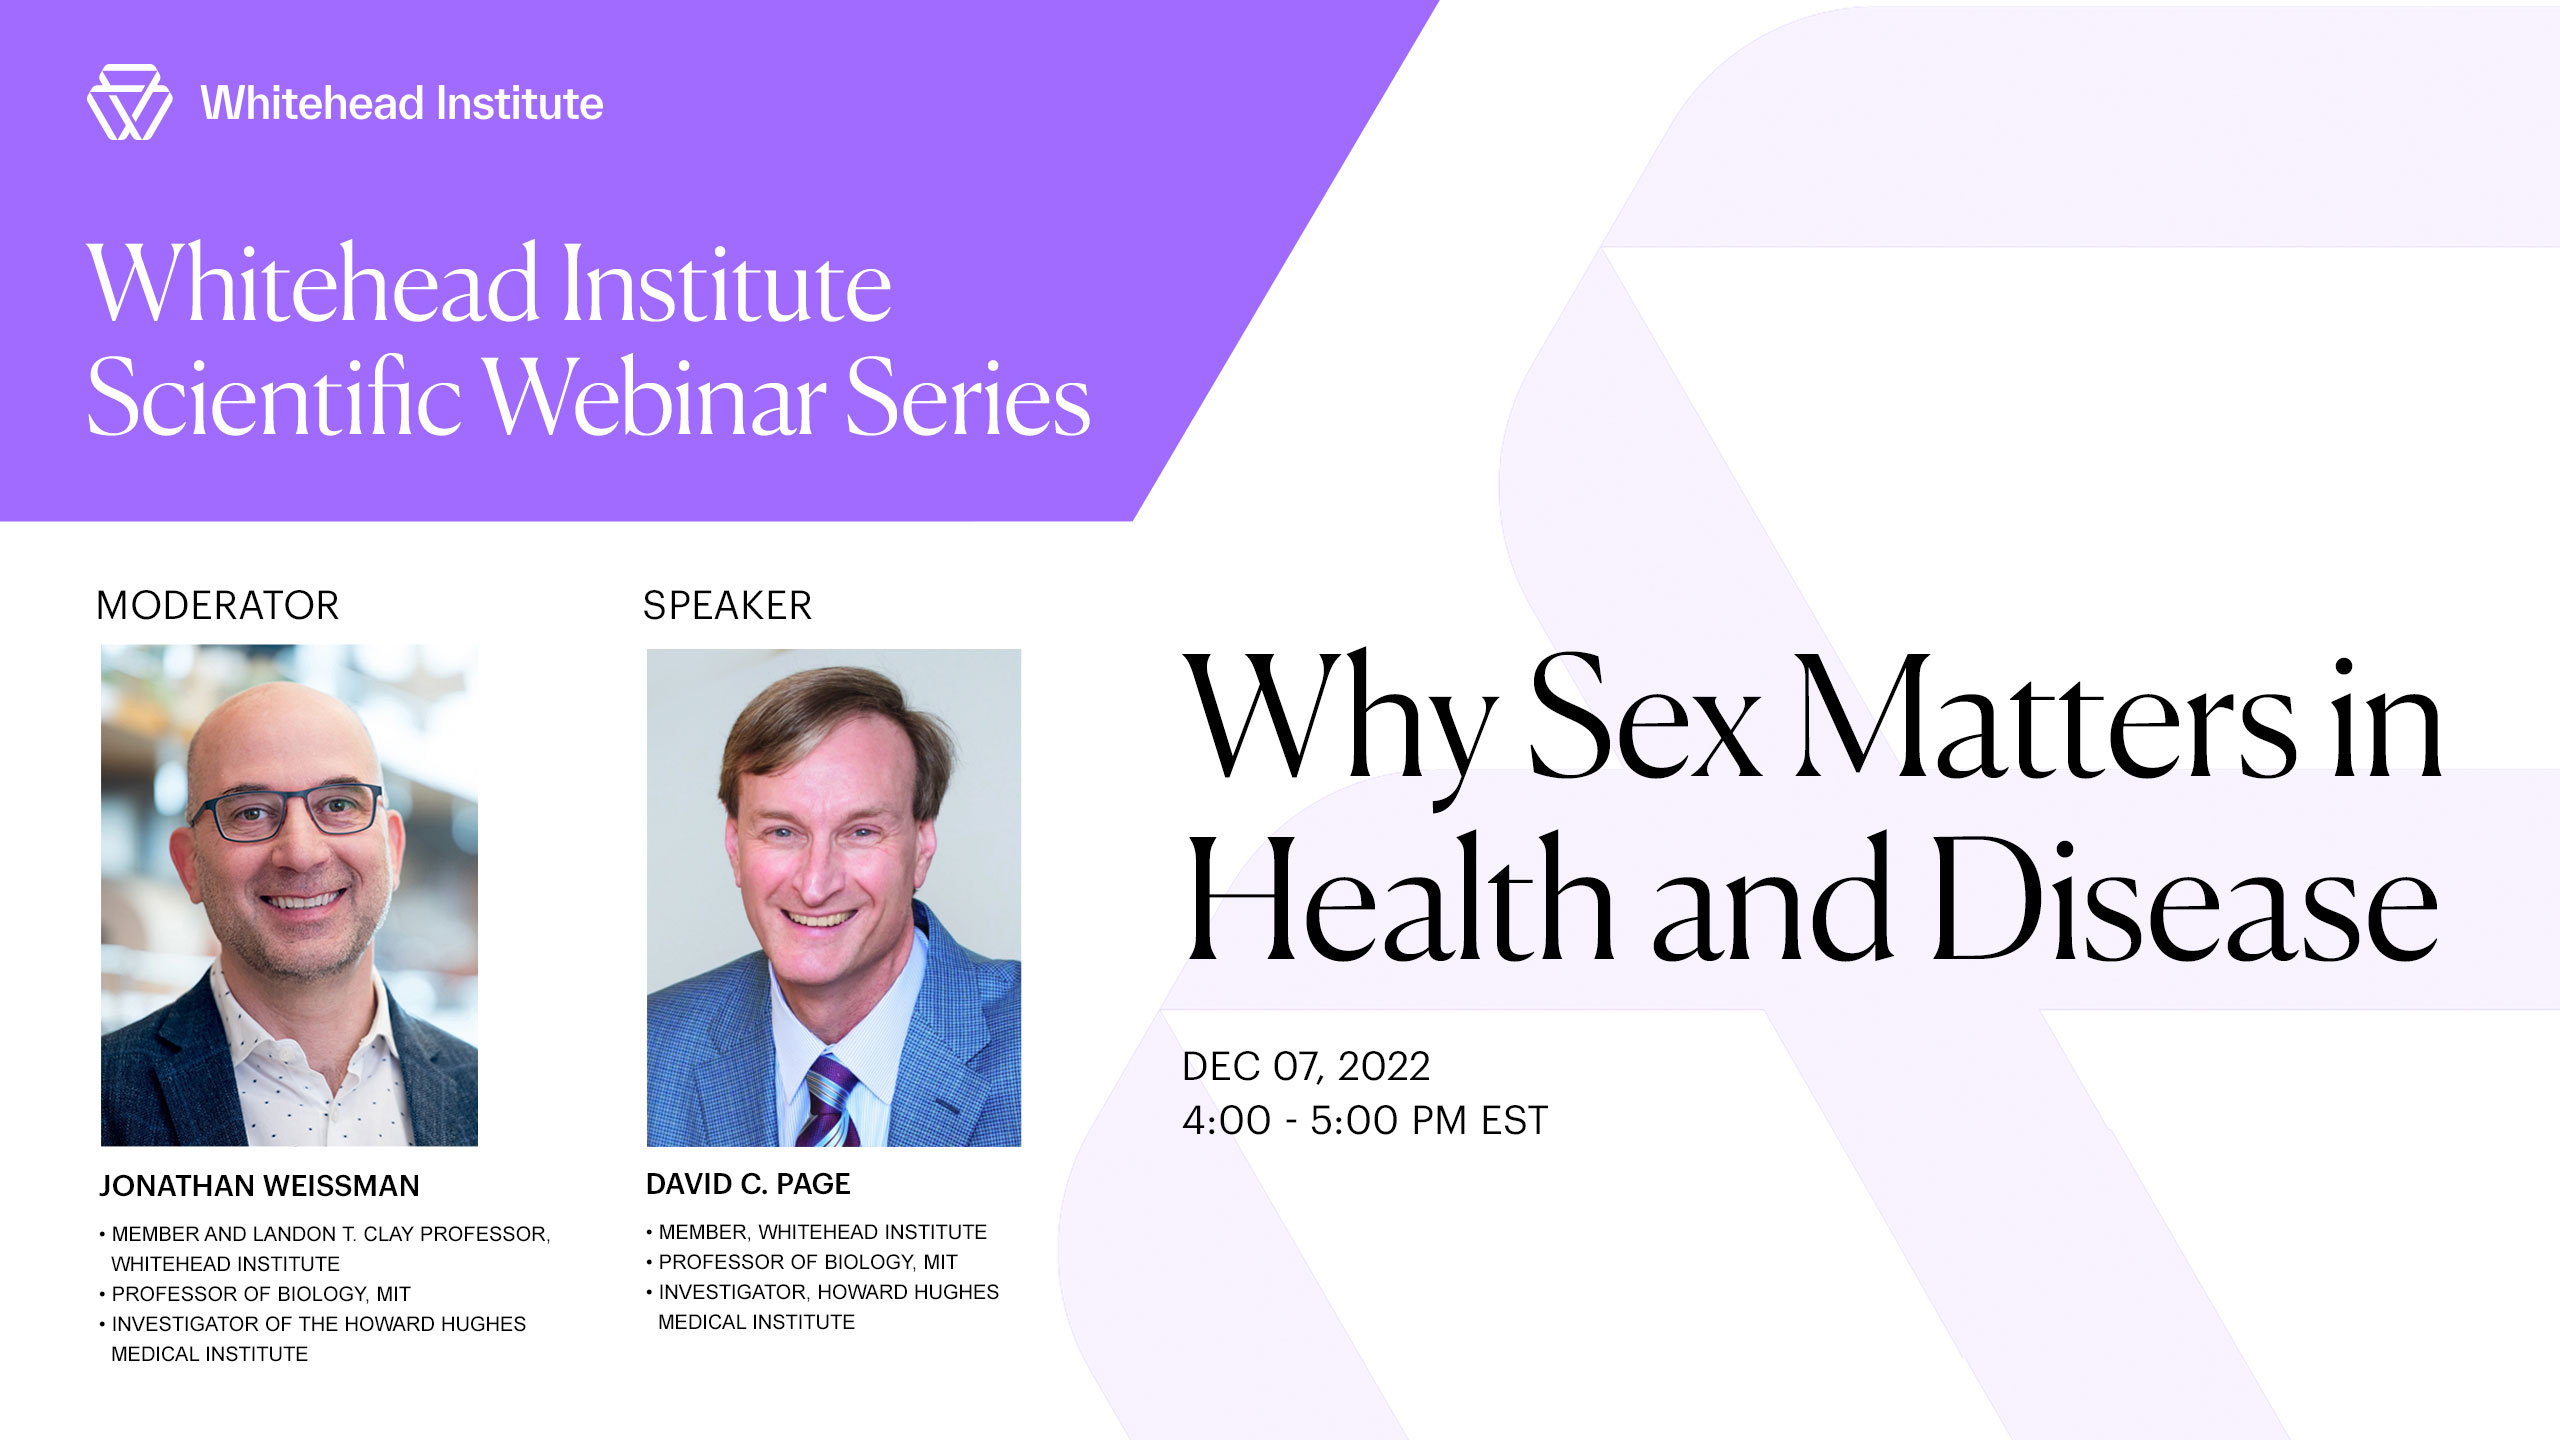 Why Sex Matters in Health and Disease